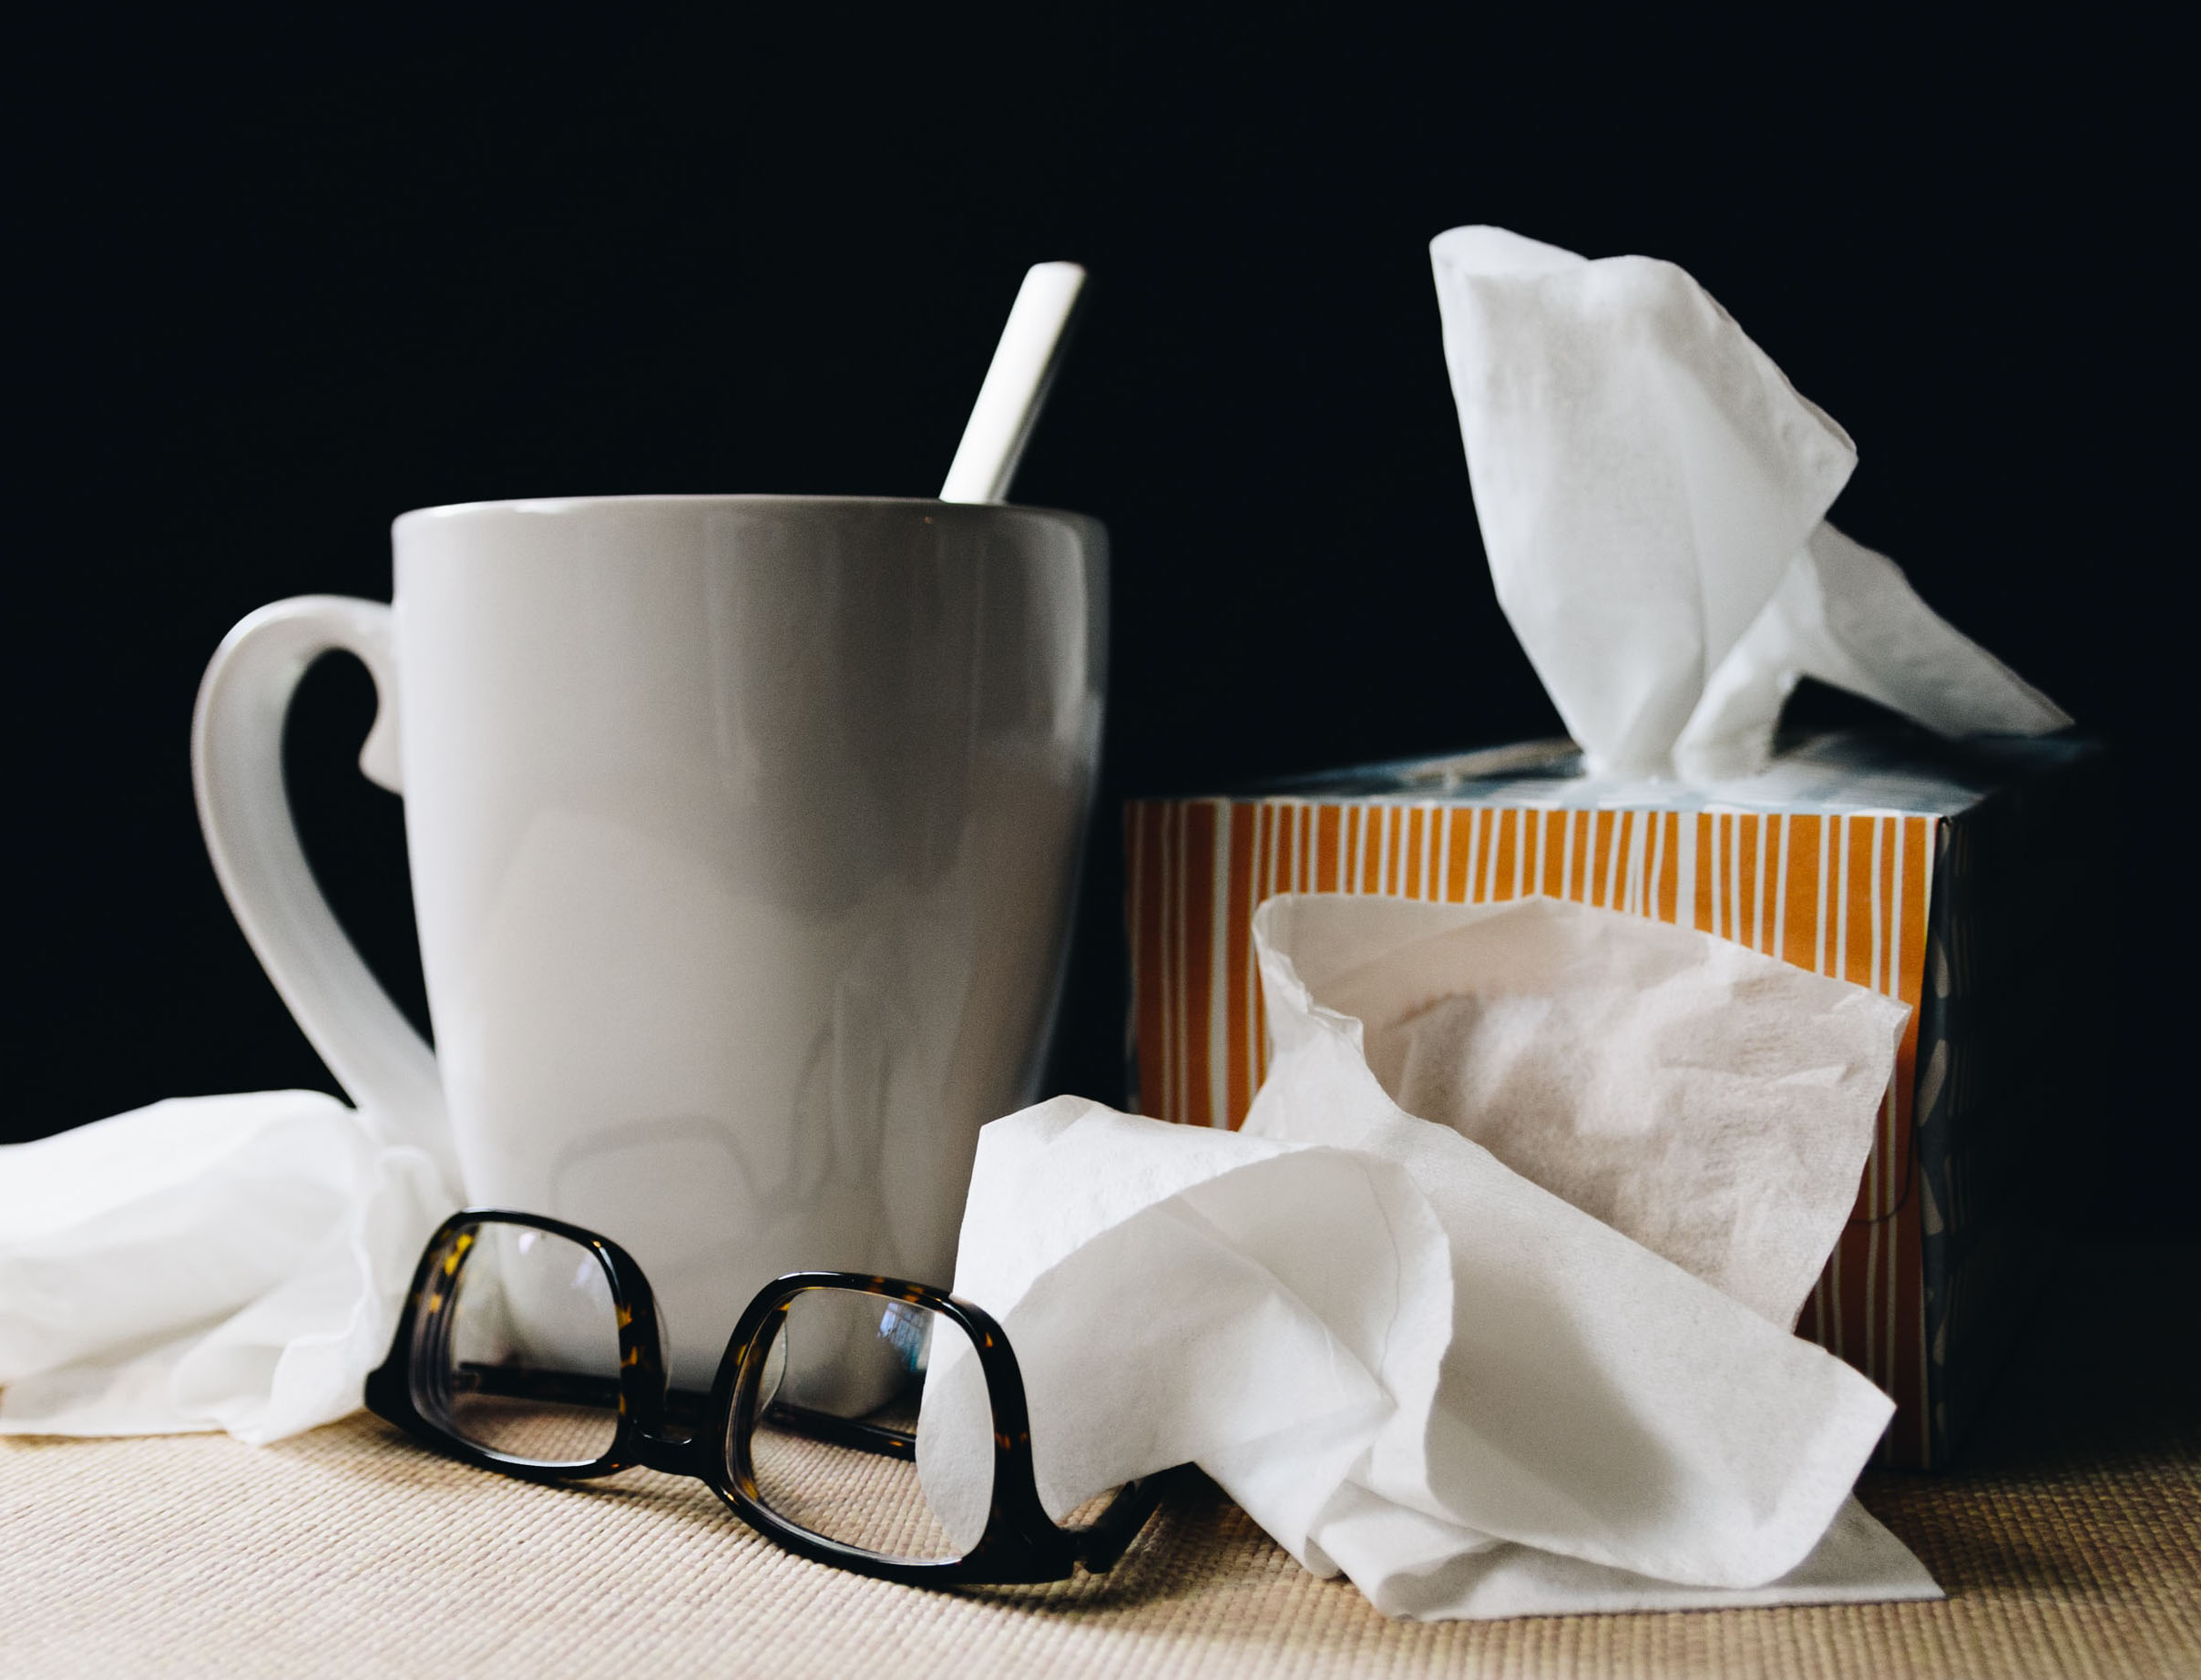 The Doctor Will See You Now – COVID-19 or Allergies?